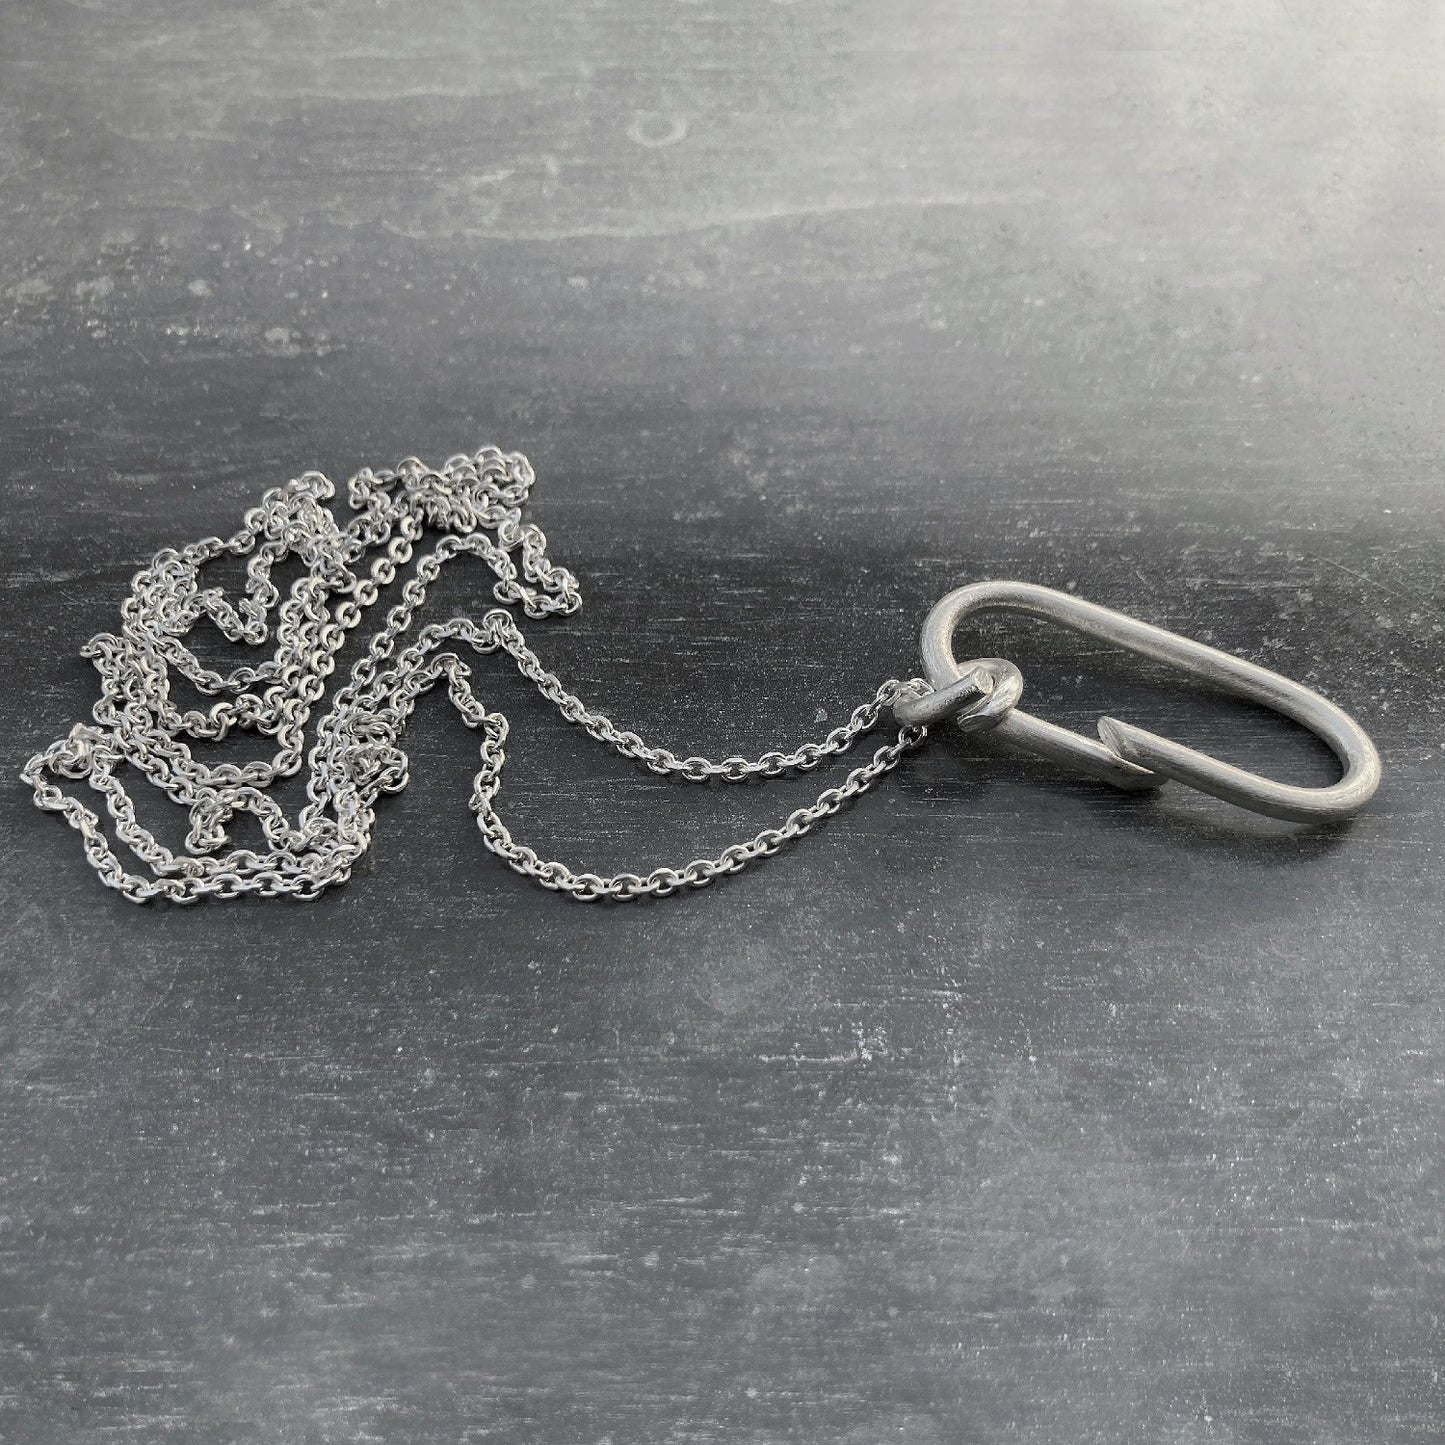 B0 necklace - Silver